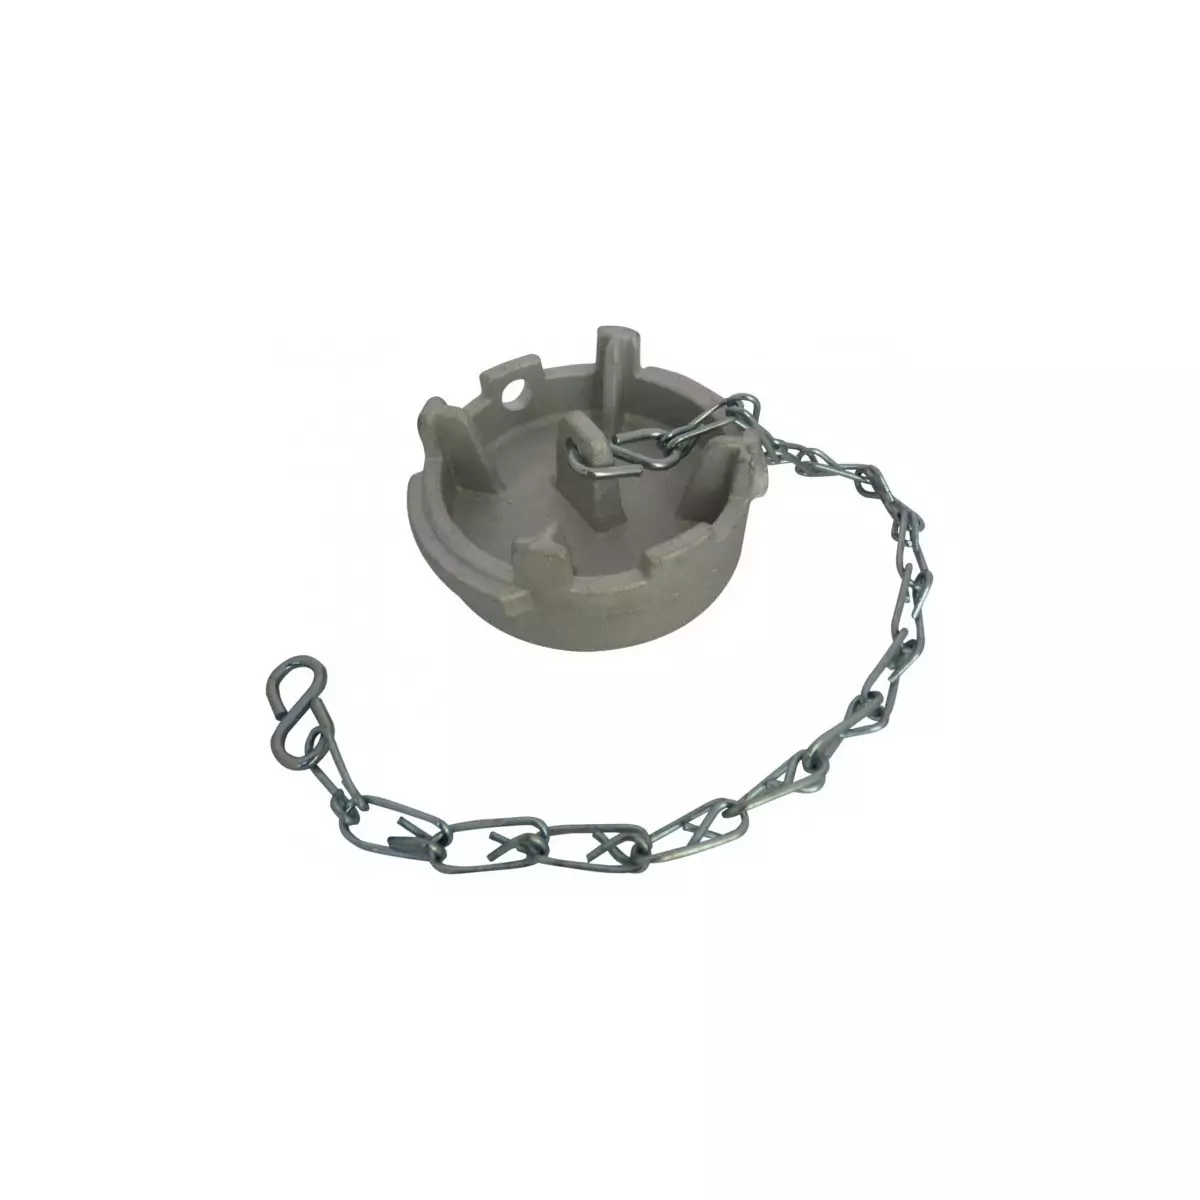 Guillemin symmetrical flat cap, padlockable irrigation type, with chain, in stainless steel